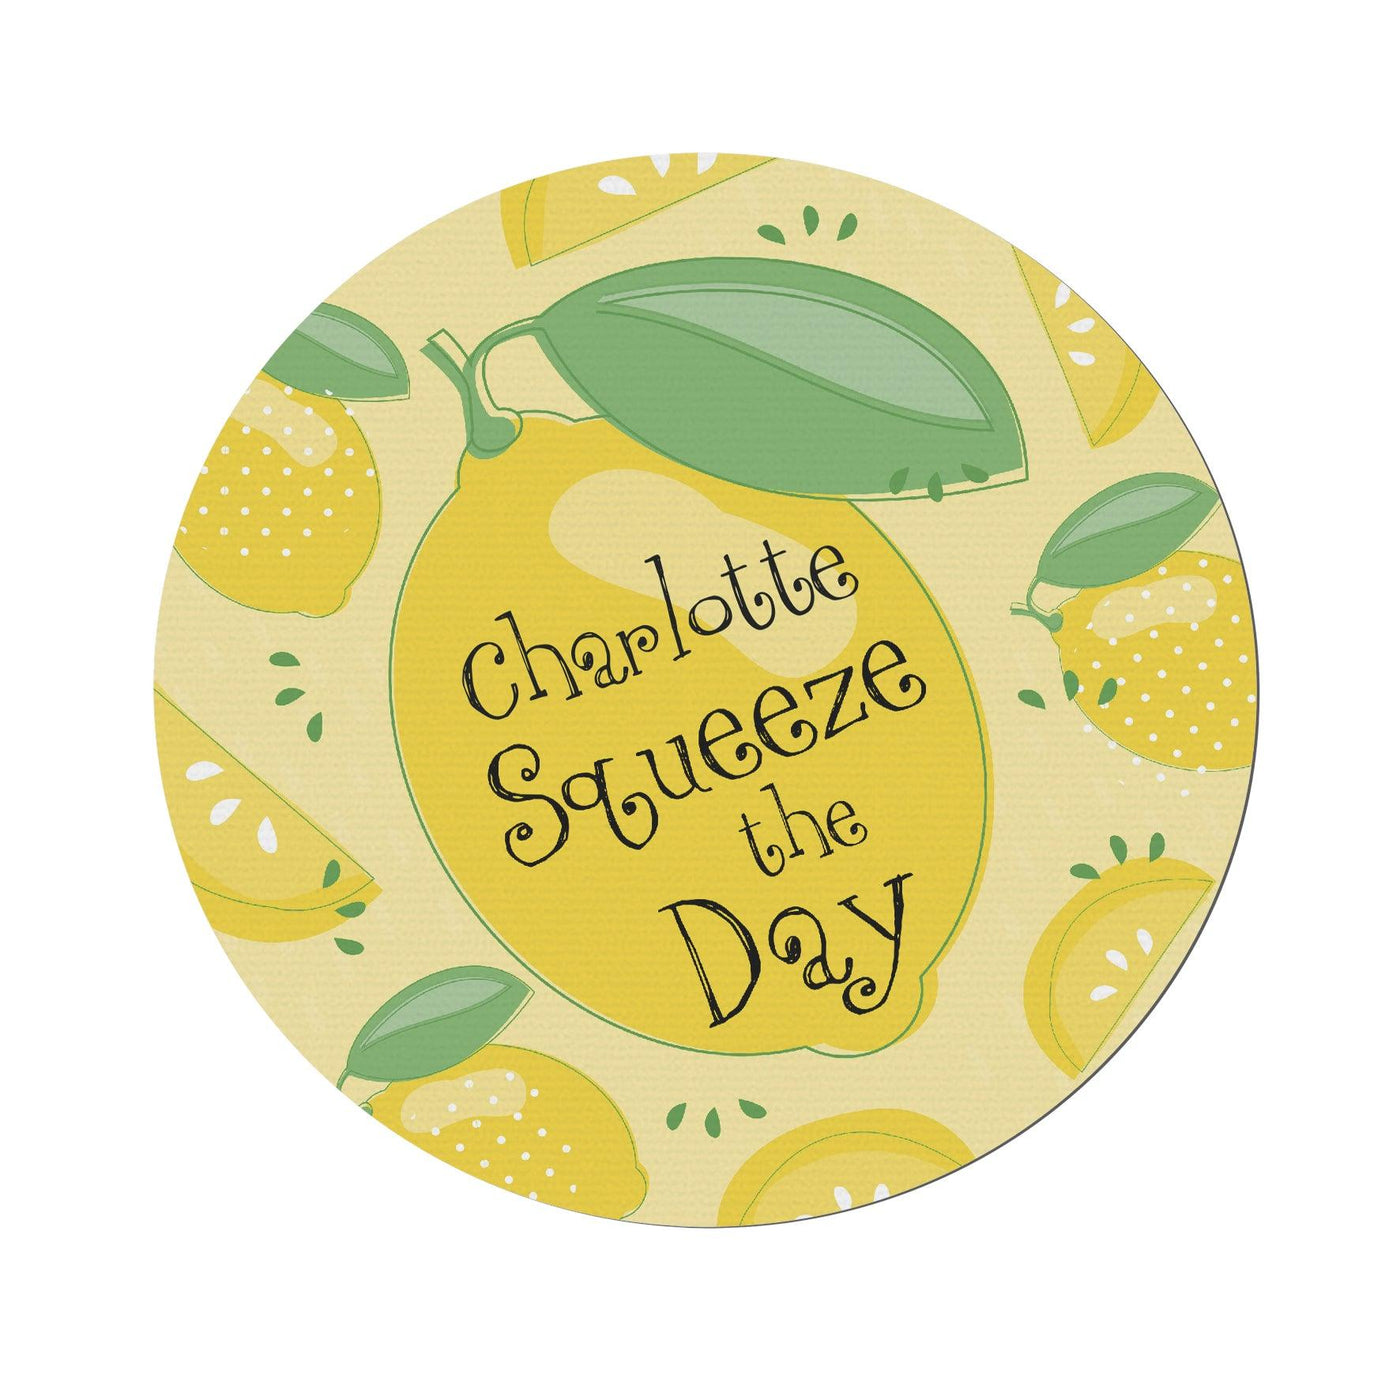 Personalised Squeeze the Day Mouse Mat - Shop Personalised Gifts